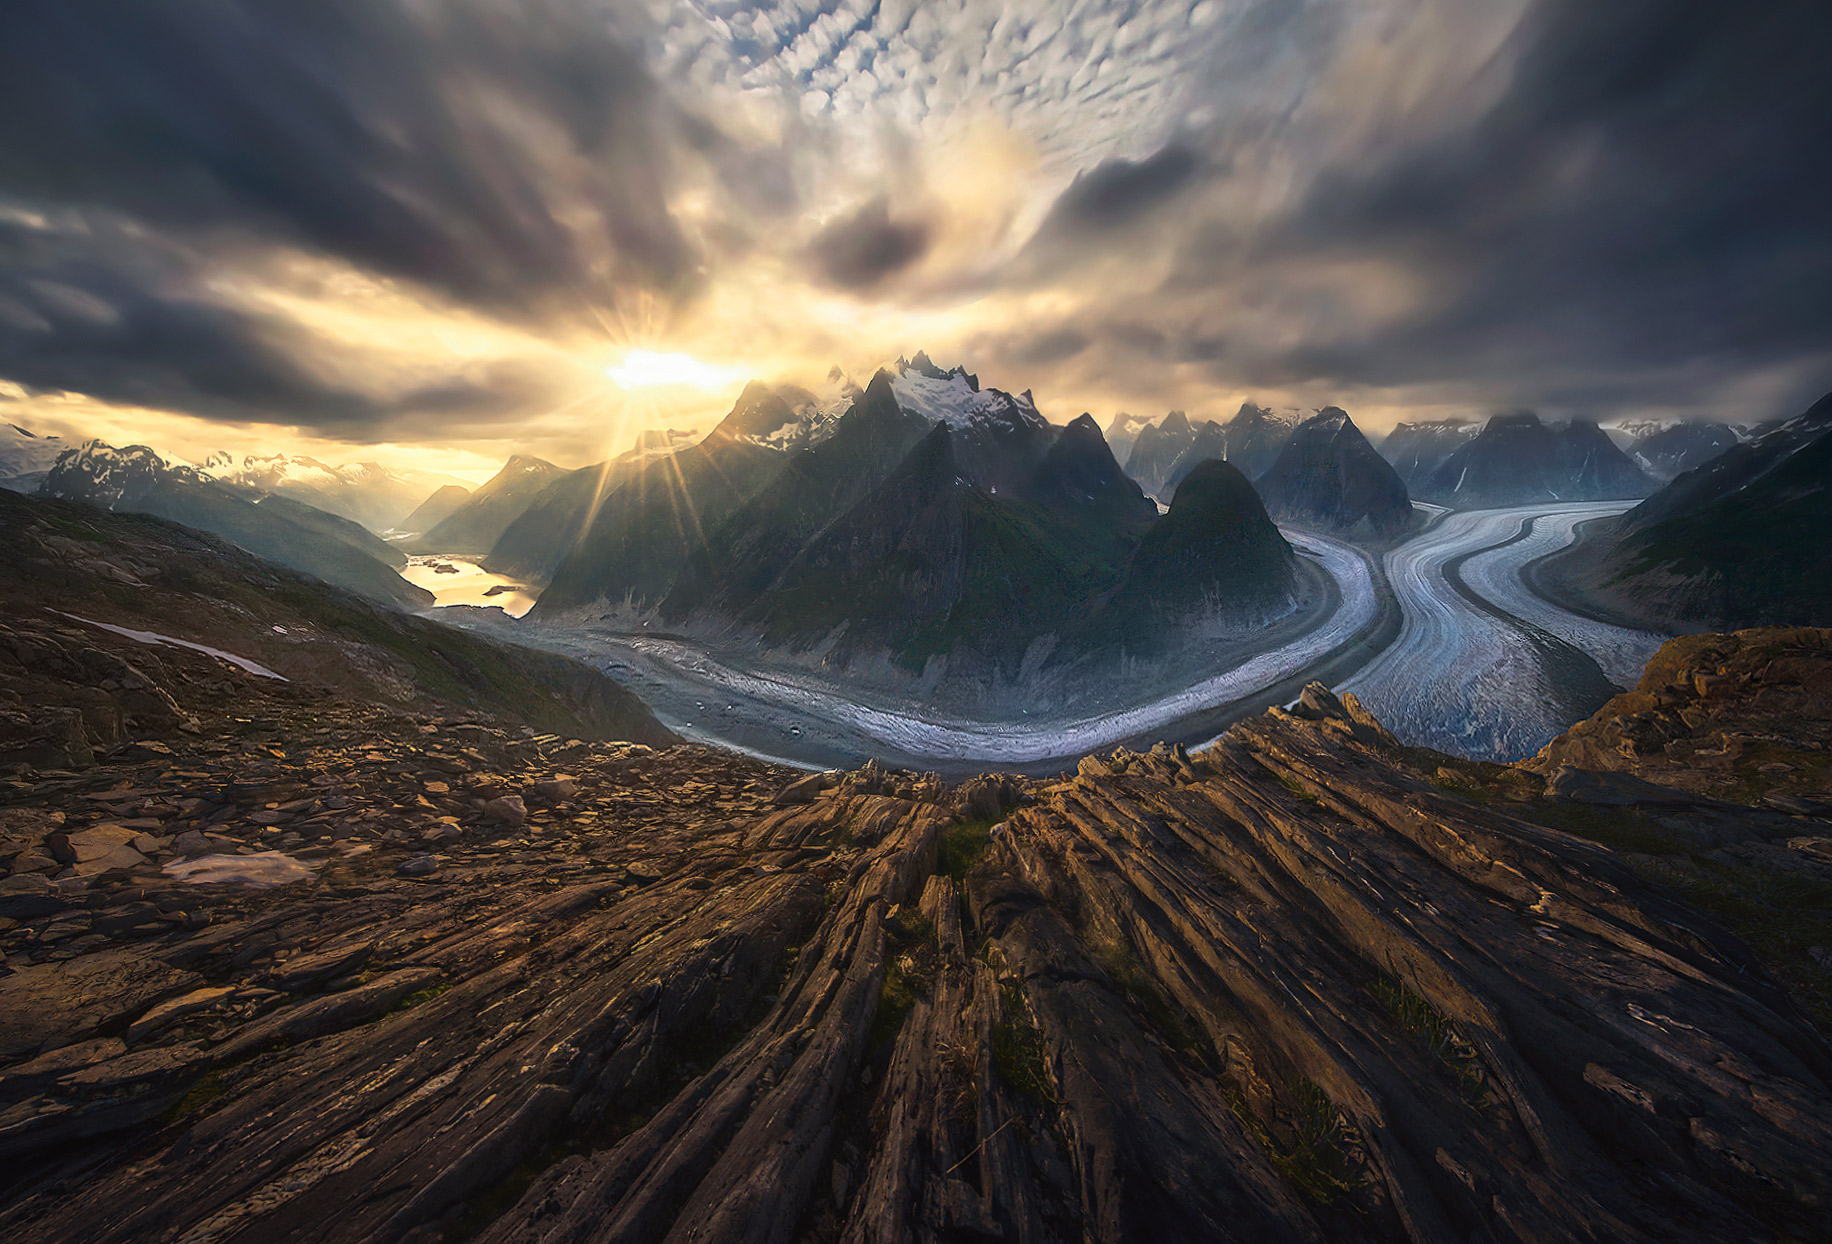 A rare view from a remote overlook featuring glacial-carved striated rocks and the winding rivers of ice below mountain peaks...